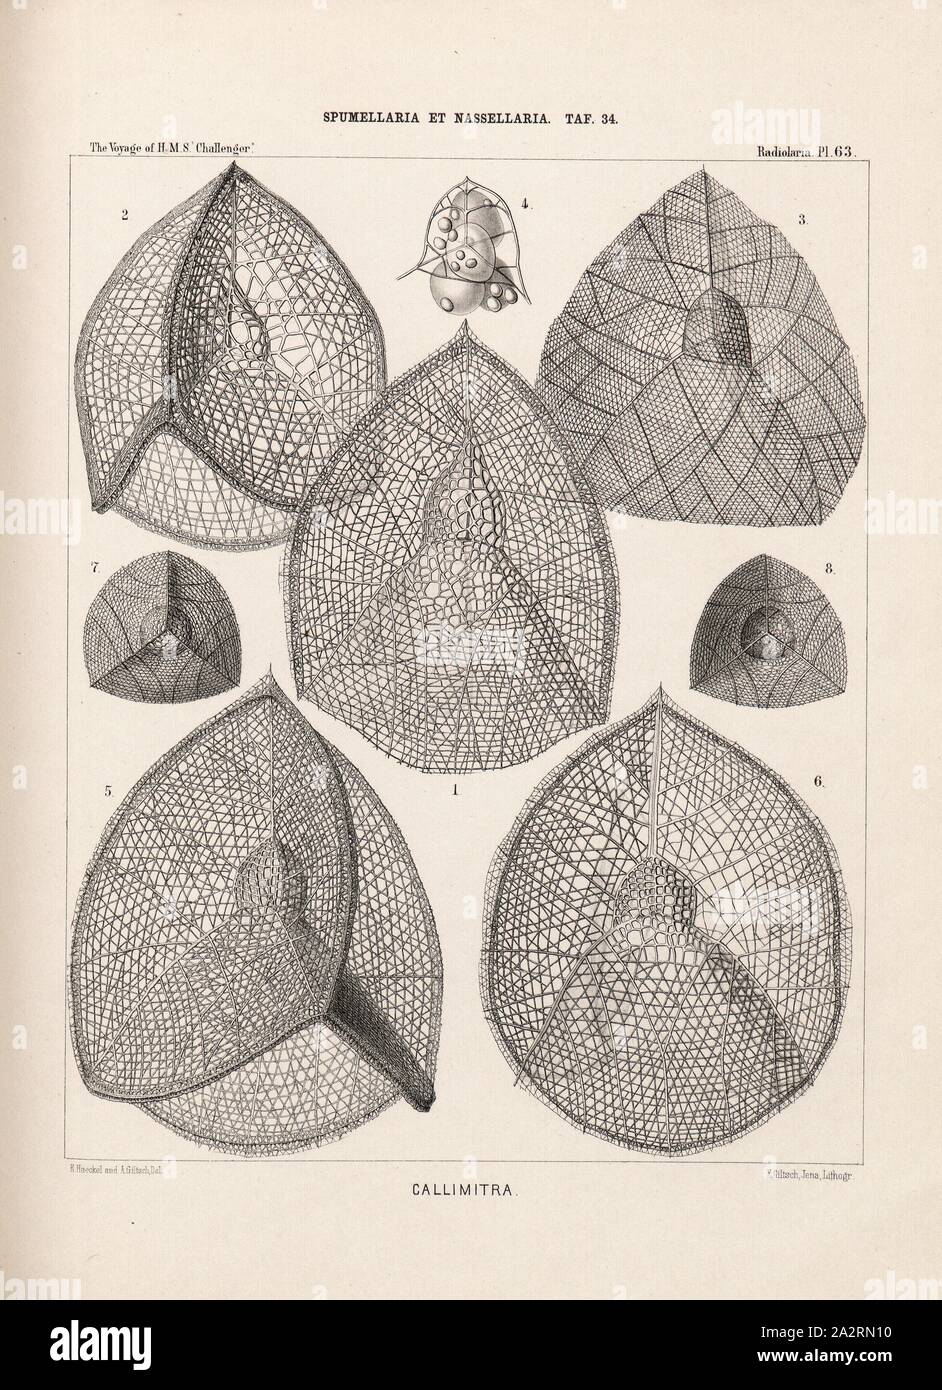 Callimitra, Illustration of various radiolarians of the Spumellaria and Nassellaria groups from the 19th century, signed: E. Haeckel and A. Giltsch Del, F. Giltsch, Jena, Lithogr, Pl. 63, after p. 248, Haeckel, Ernst (del.); Giltsch, A. (del.); Giltsch, F. (lith.); Jena (lith.), 1862, Ernst Haeckel: Die Radiolarien (Rhizopoda Radiaria). Zweiter Theil. Berlin: Verlag von Georg Reimer, 1862 Stock Photo